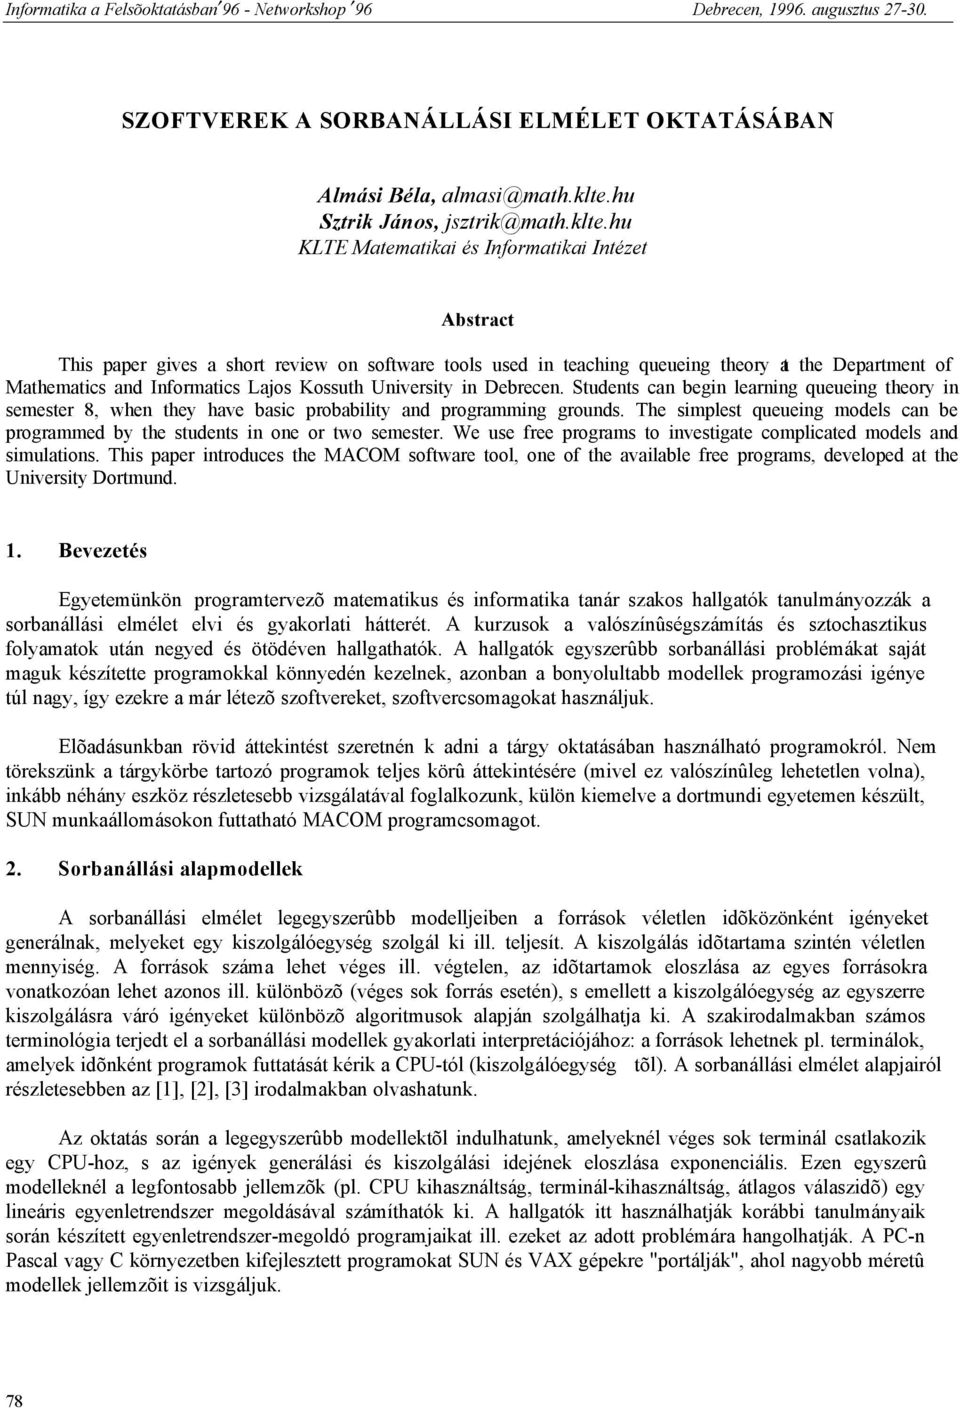 hu KLTE Matematikai és Informatikai Intézet Abstract This paper gives a short review on software tools used in teaching queueing theory at the Department of Mathematics and Informatics Lajos Kossuth